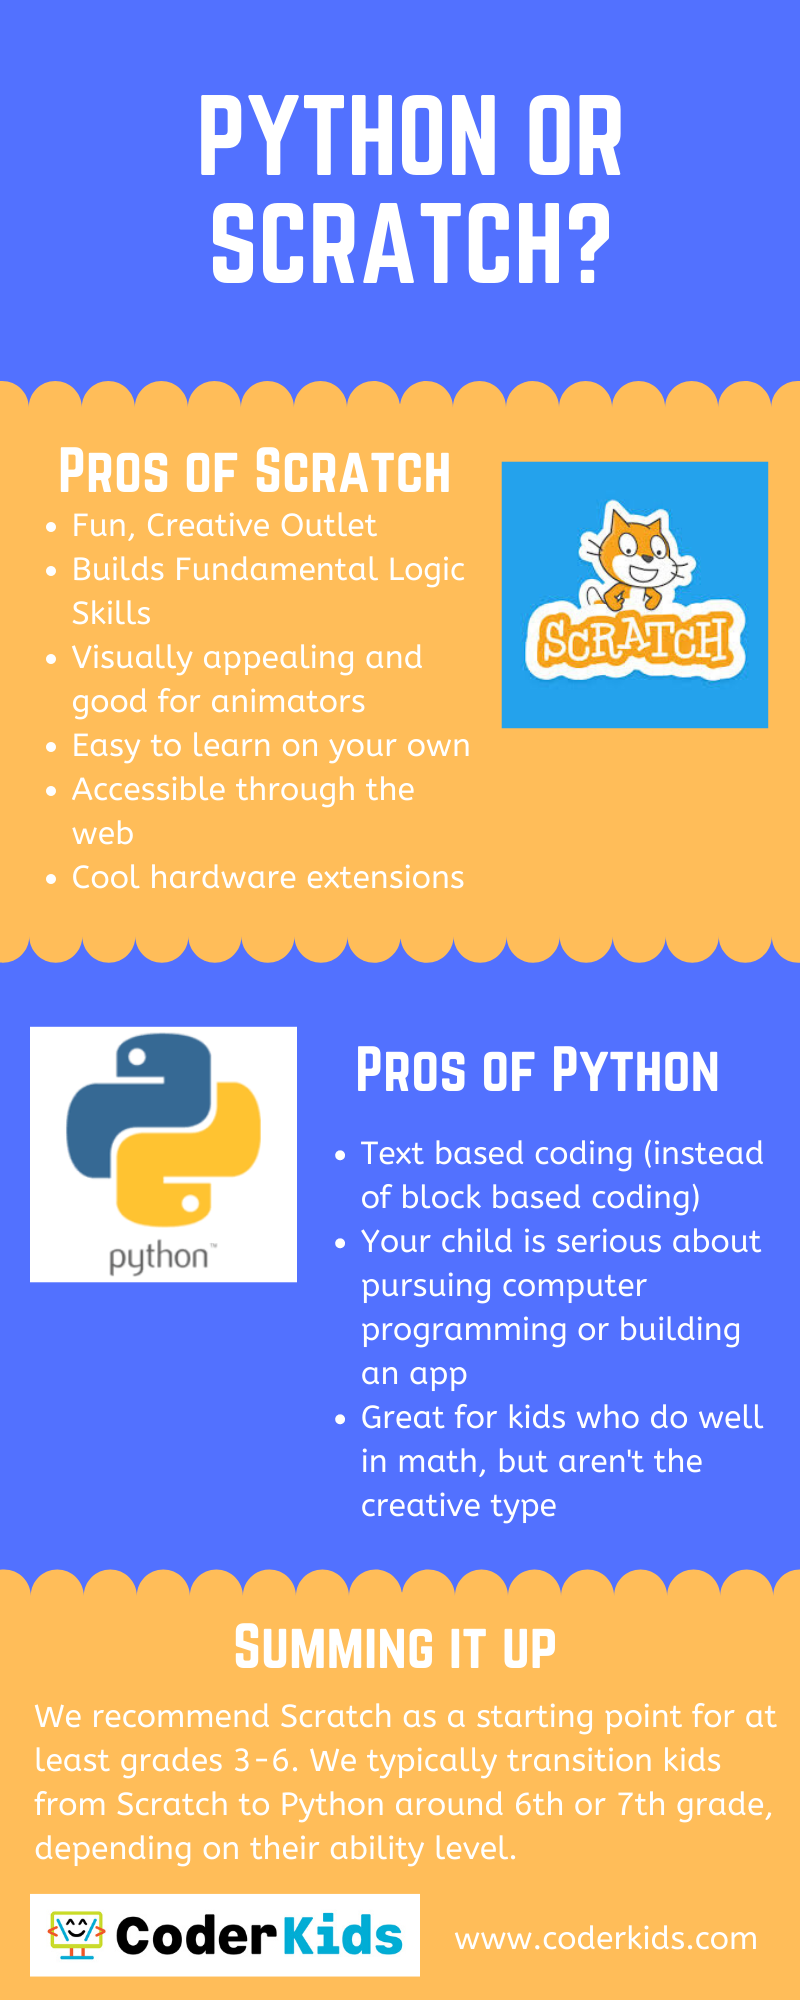 Should kids learn Python or Scratch?